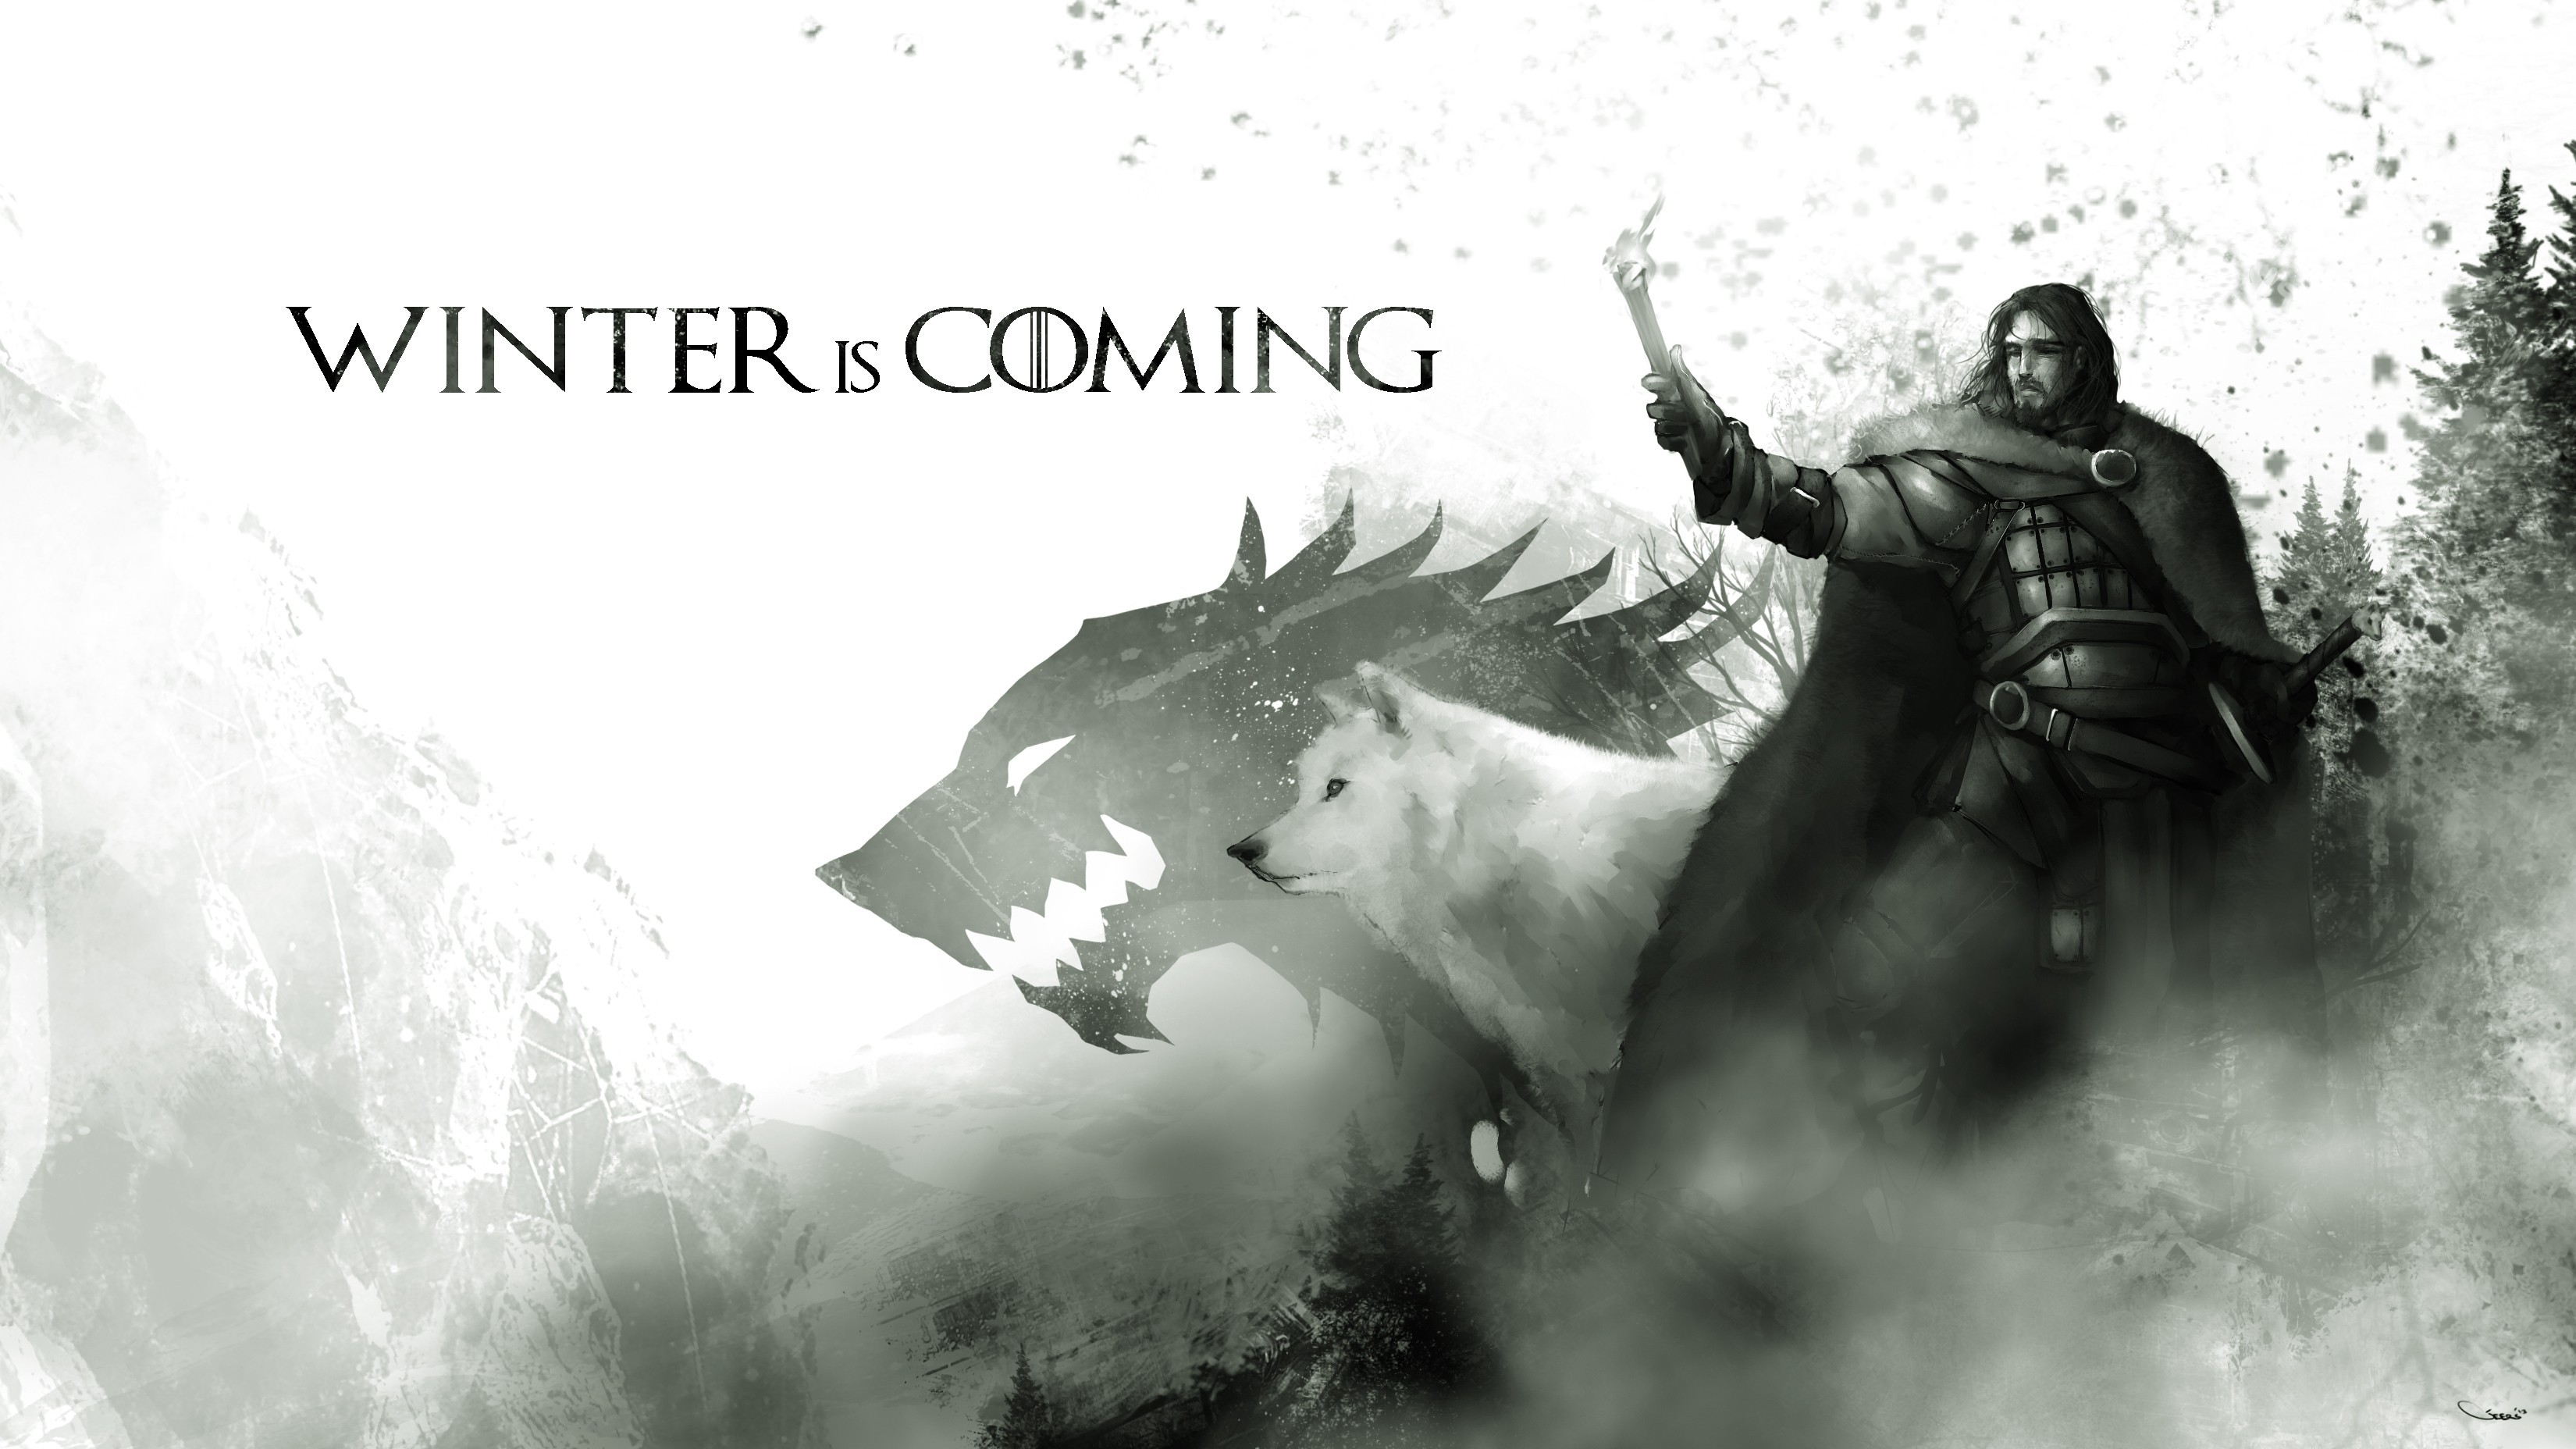 Game Of Thrones Winter Is Coming Tv Series Fantasy Art 3300x1856